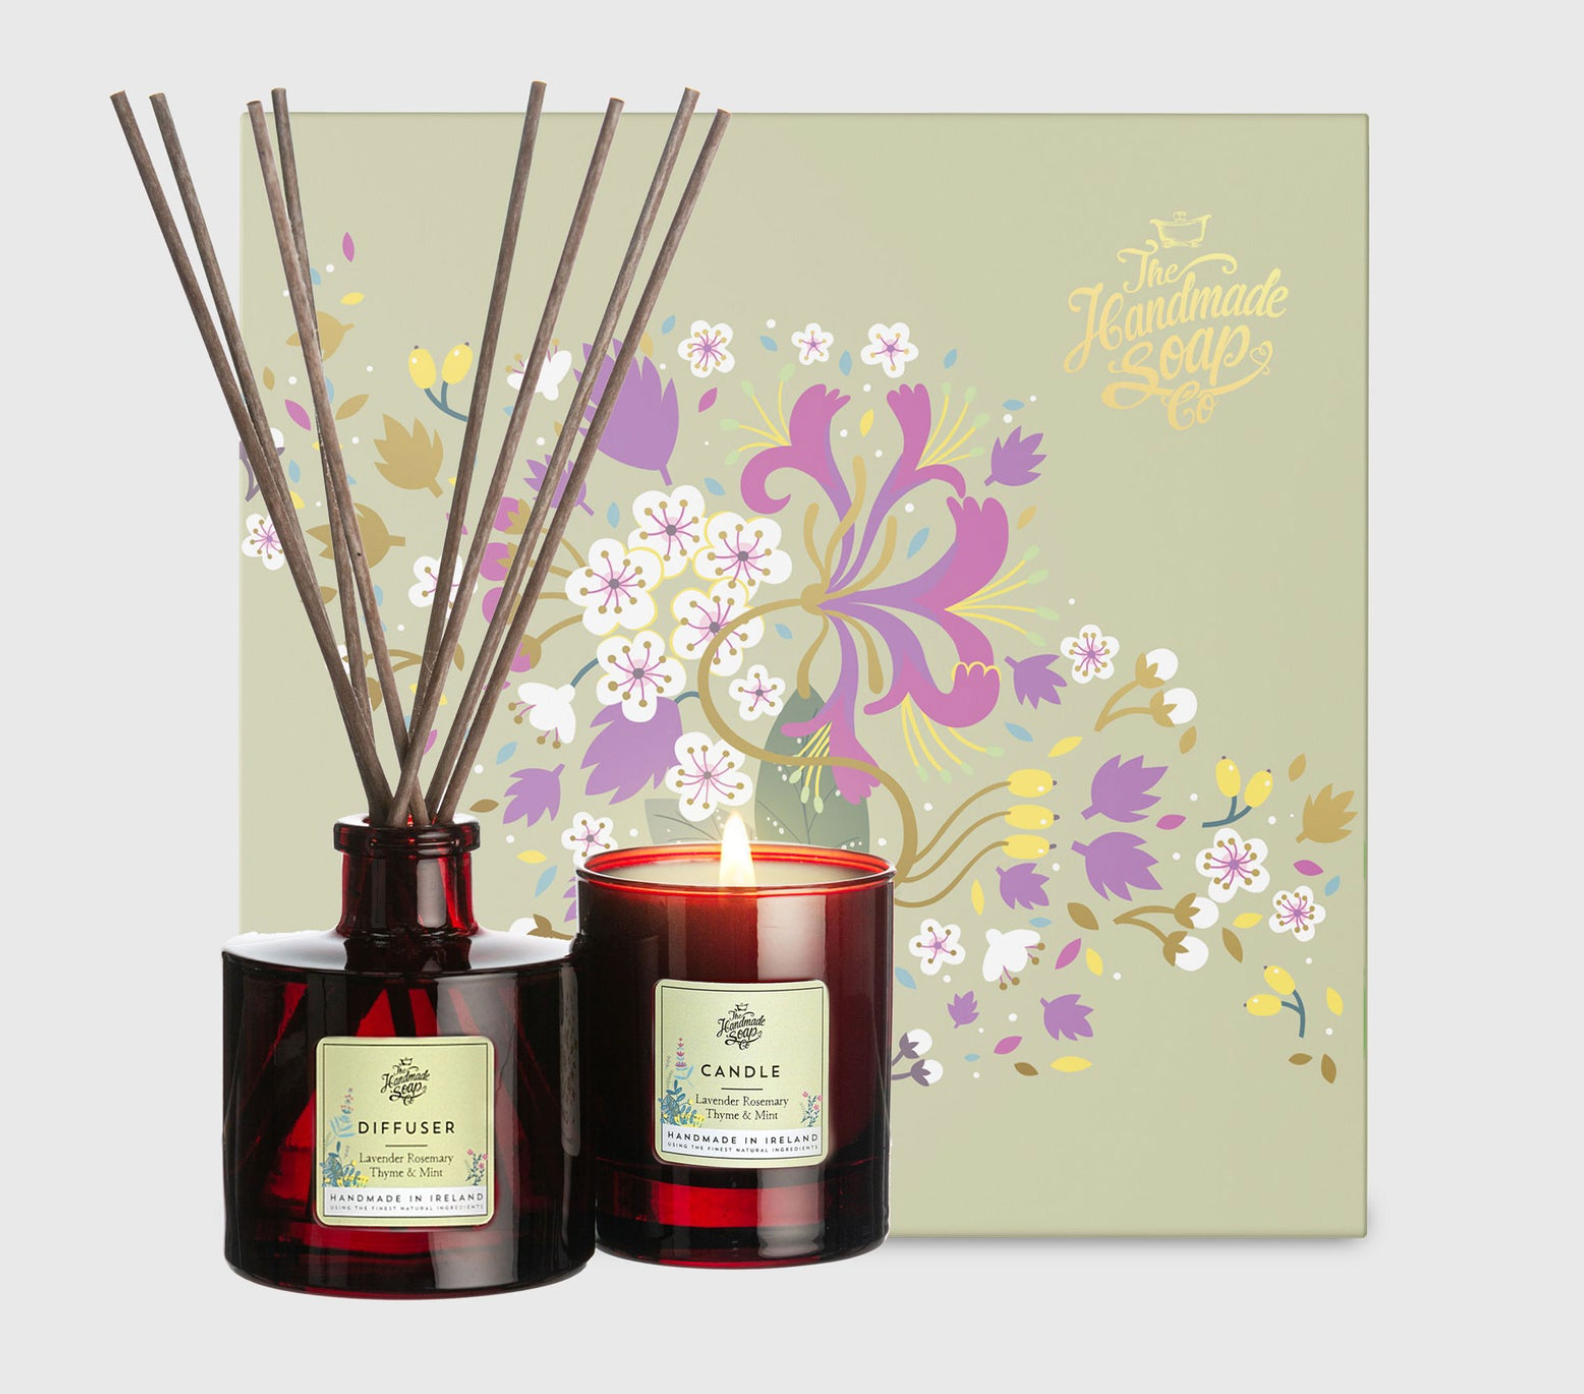 The Handmade Soap Company, Candle & Diffuser Set Lavander, Rosemary & Mint